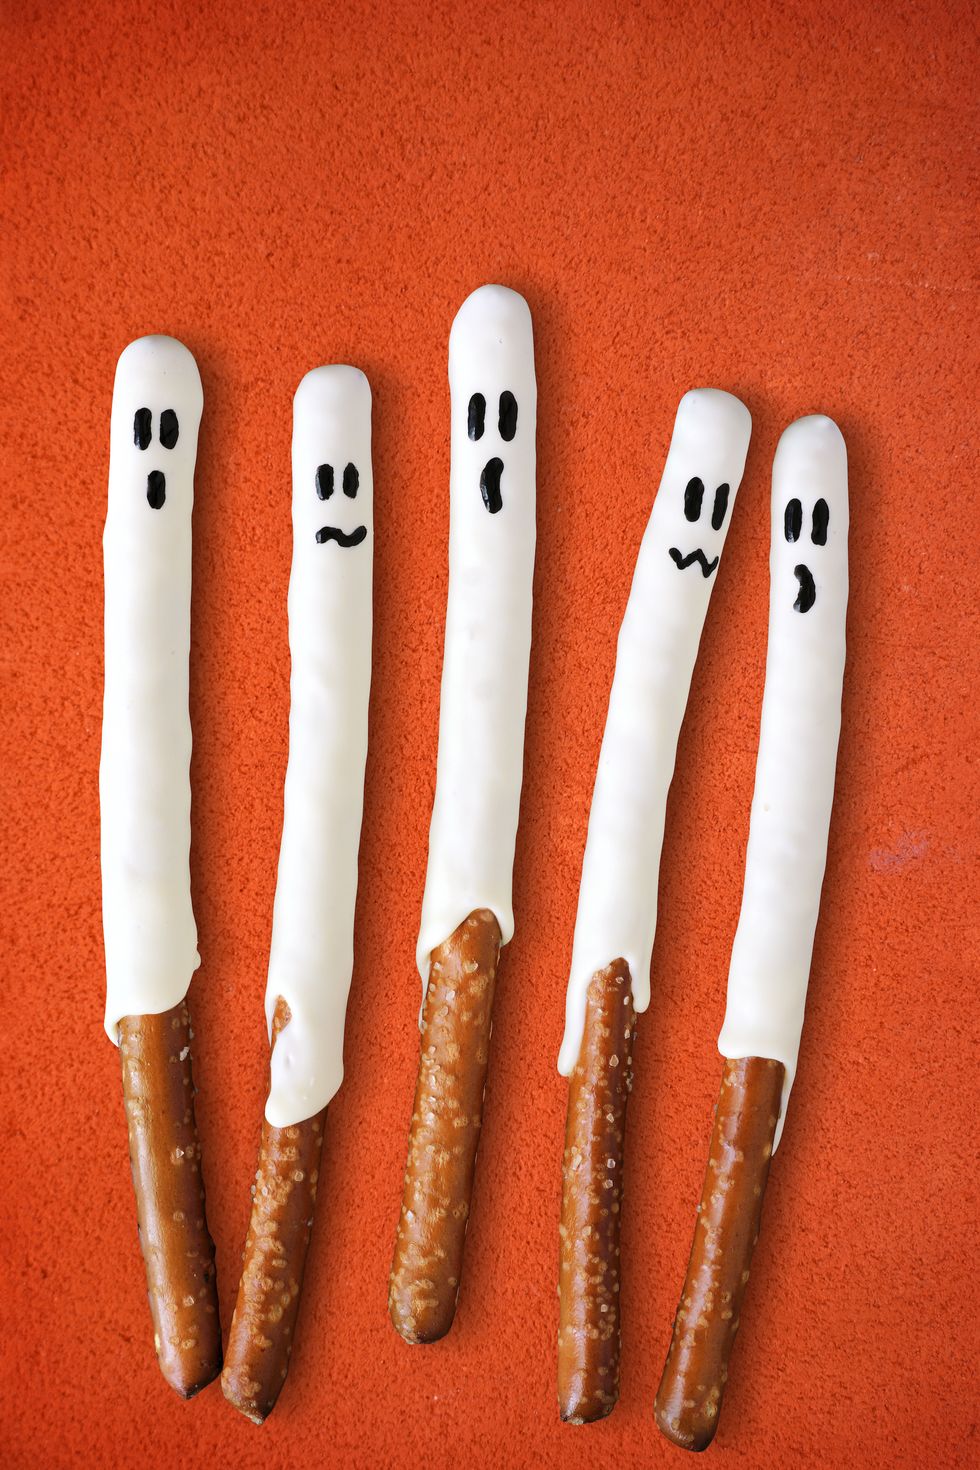 pretzel sticks decorated as white ghosts for halloween